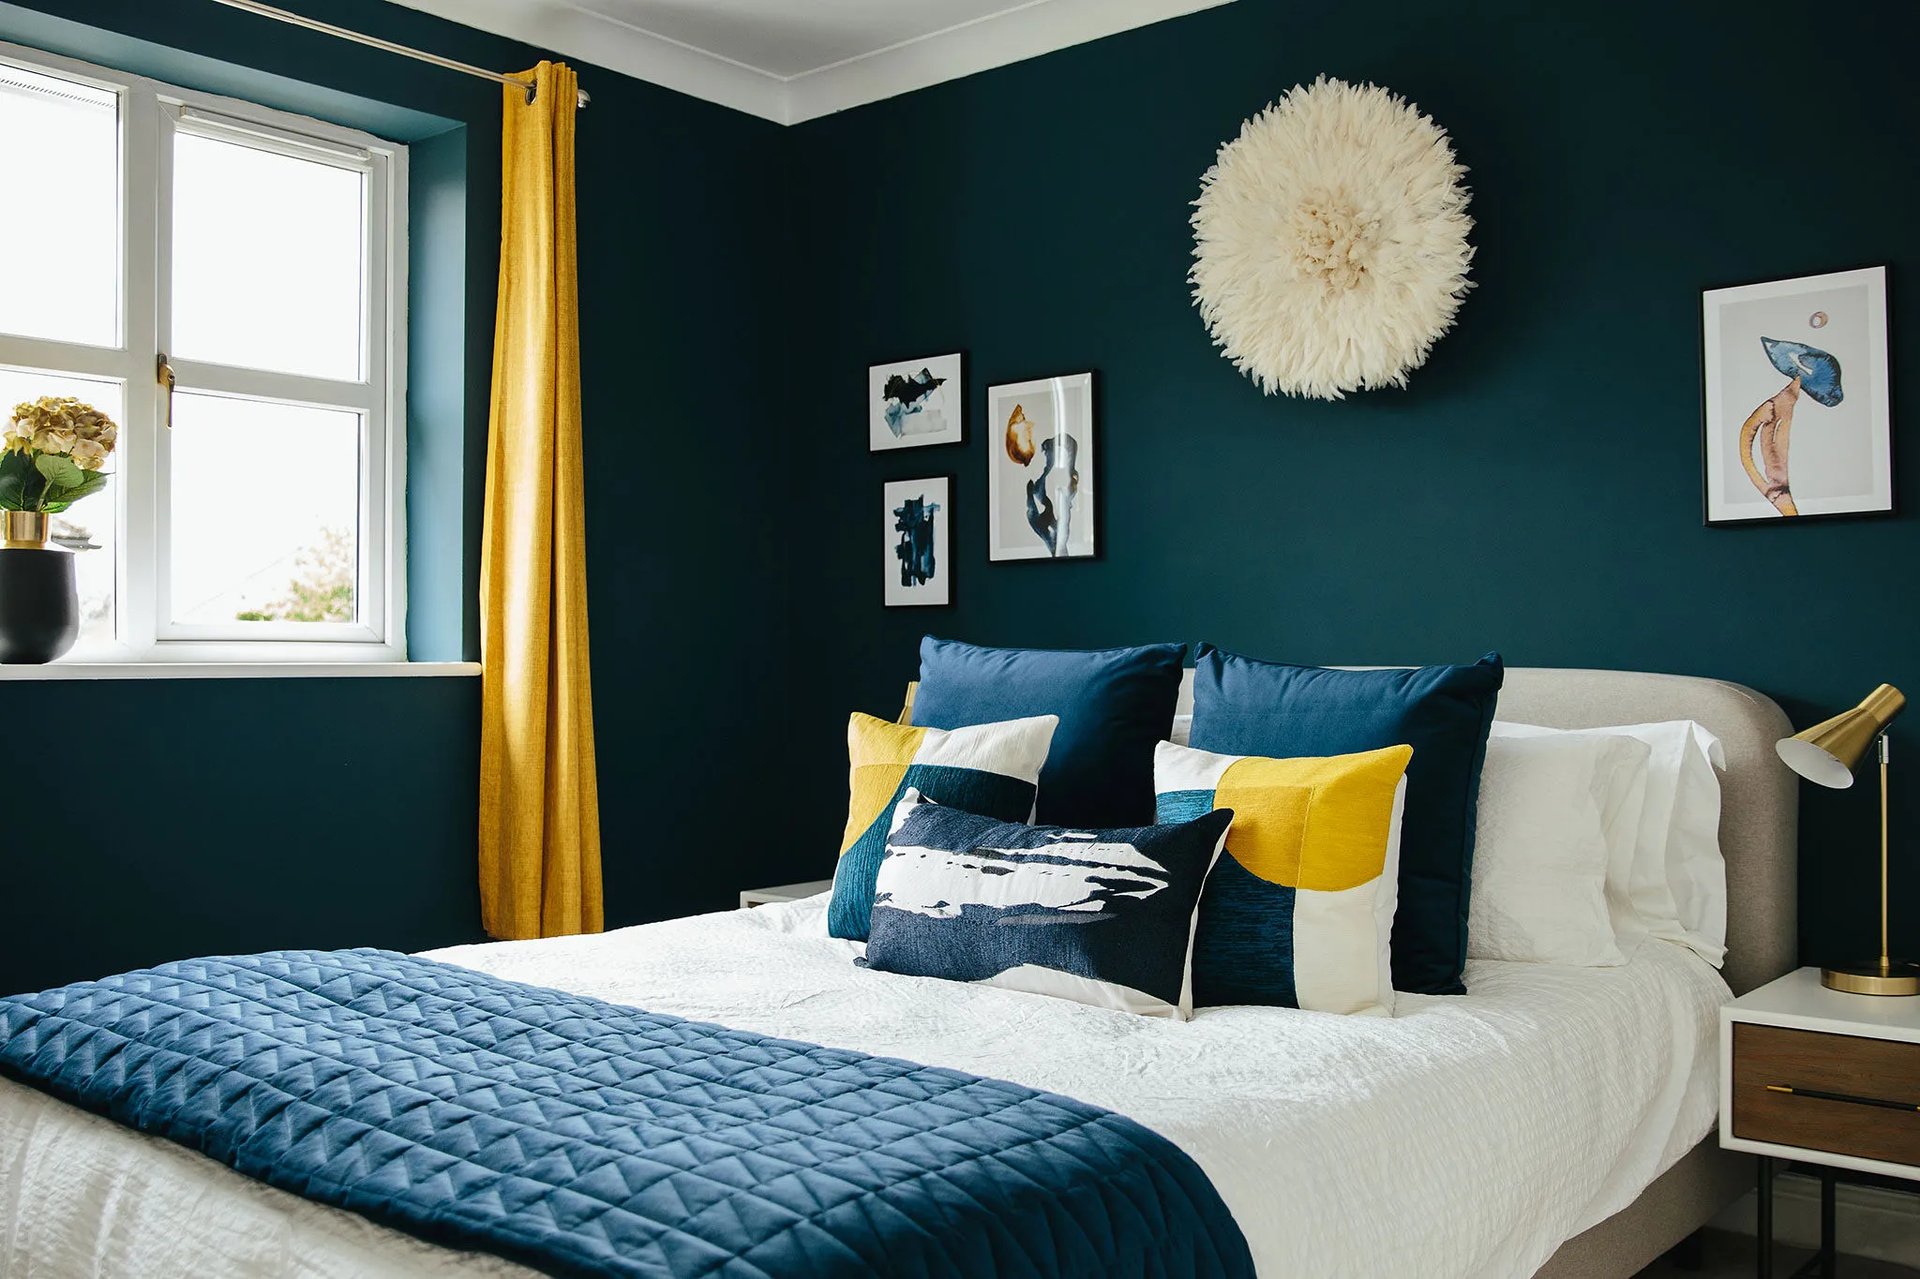 Bright and bold bedroom with pops of cheerful yellow